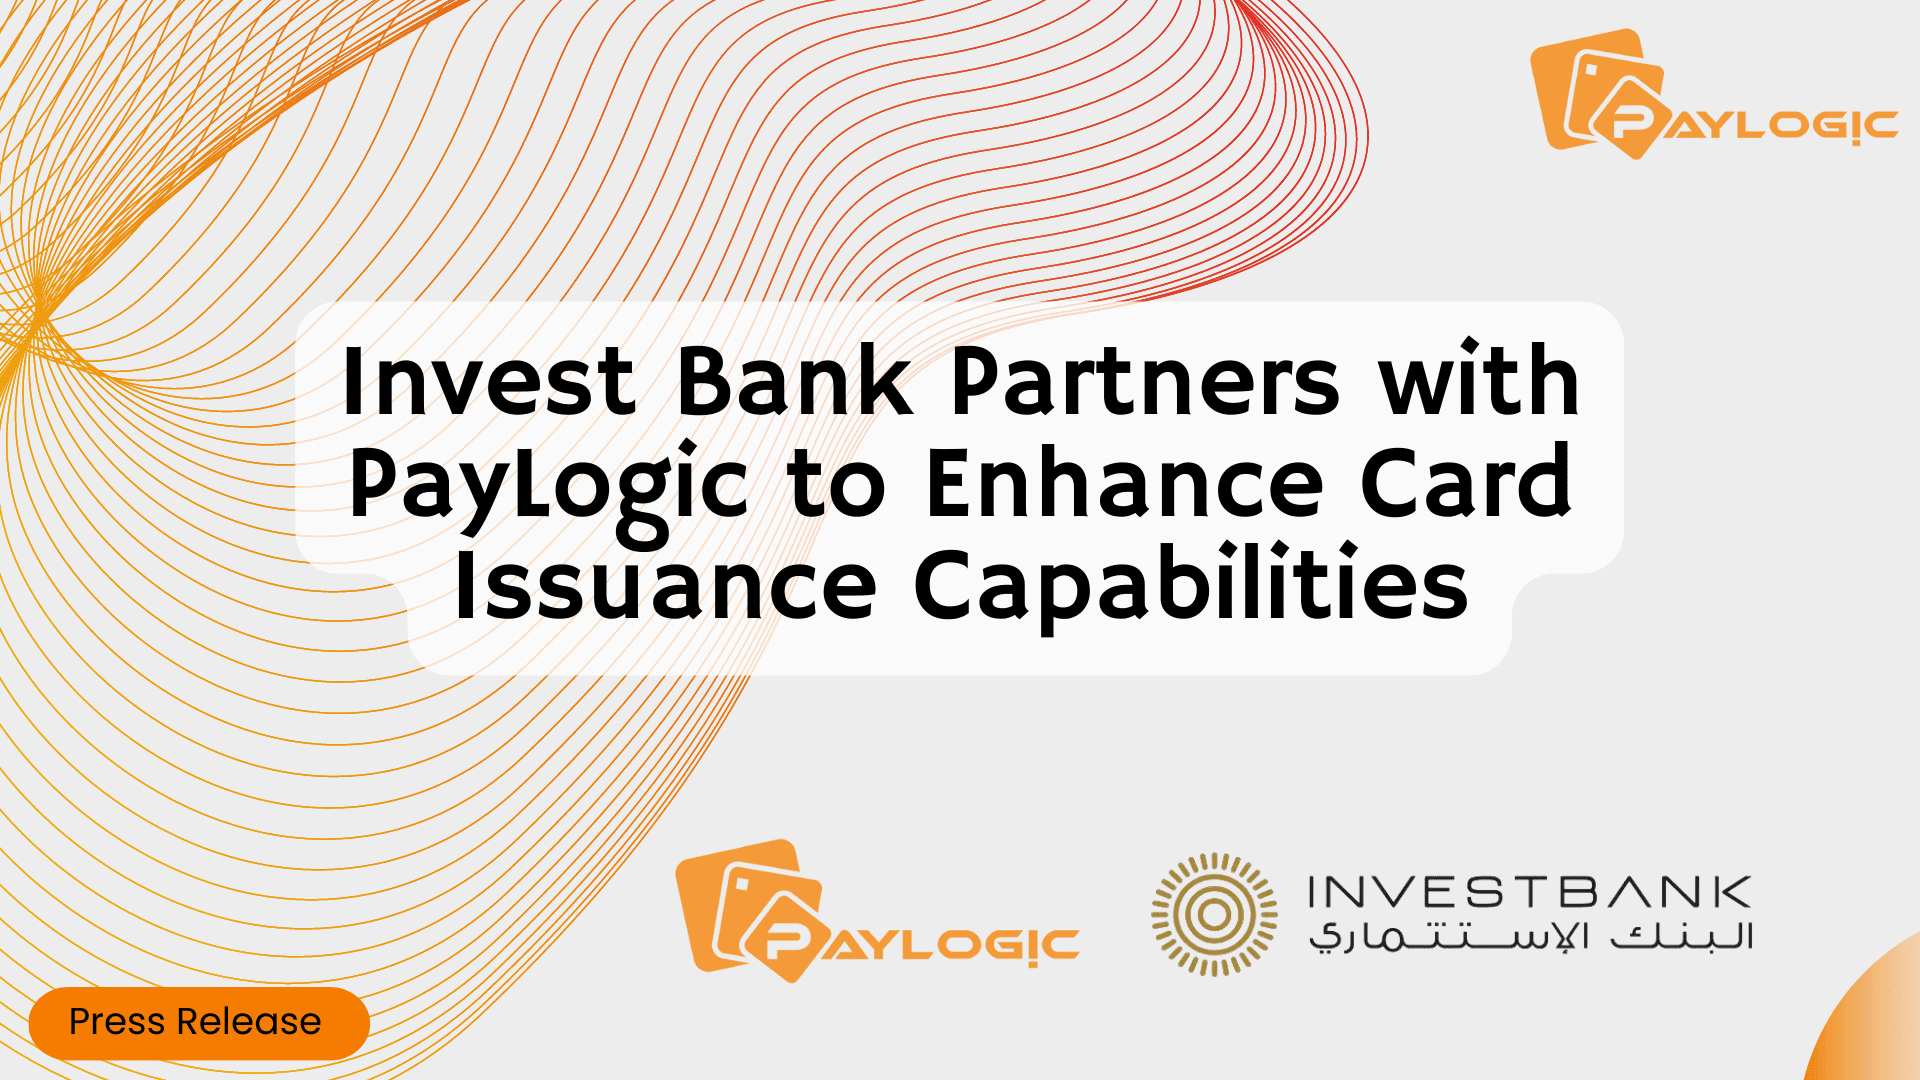 Invest Bank Partners with PayLogic to Enhance Card Issuance Capabilities